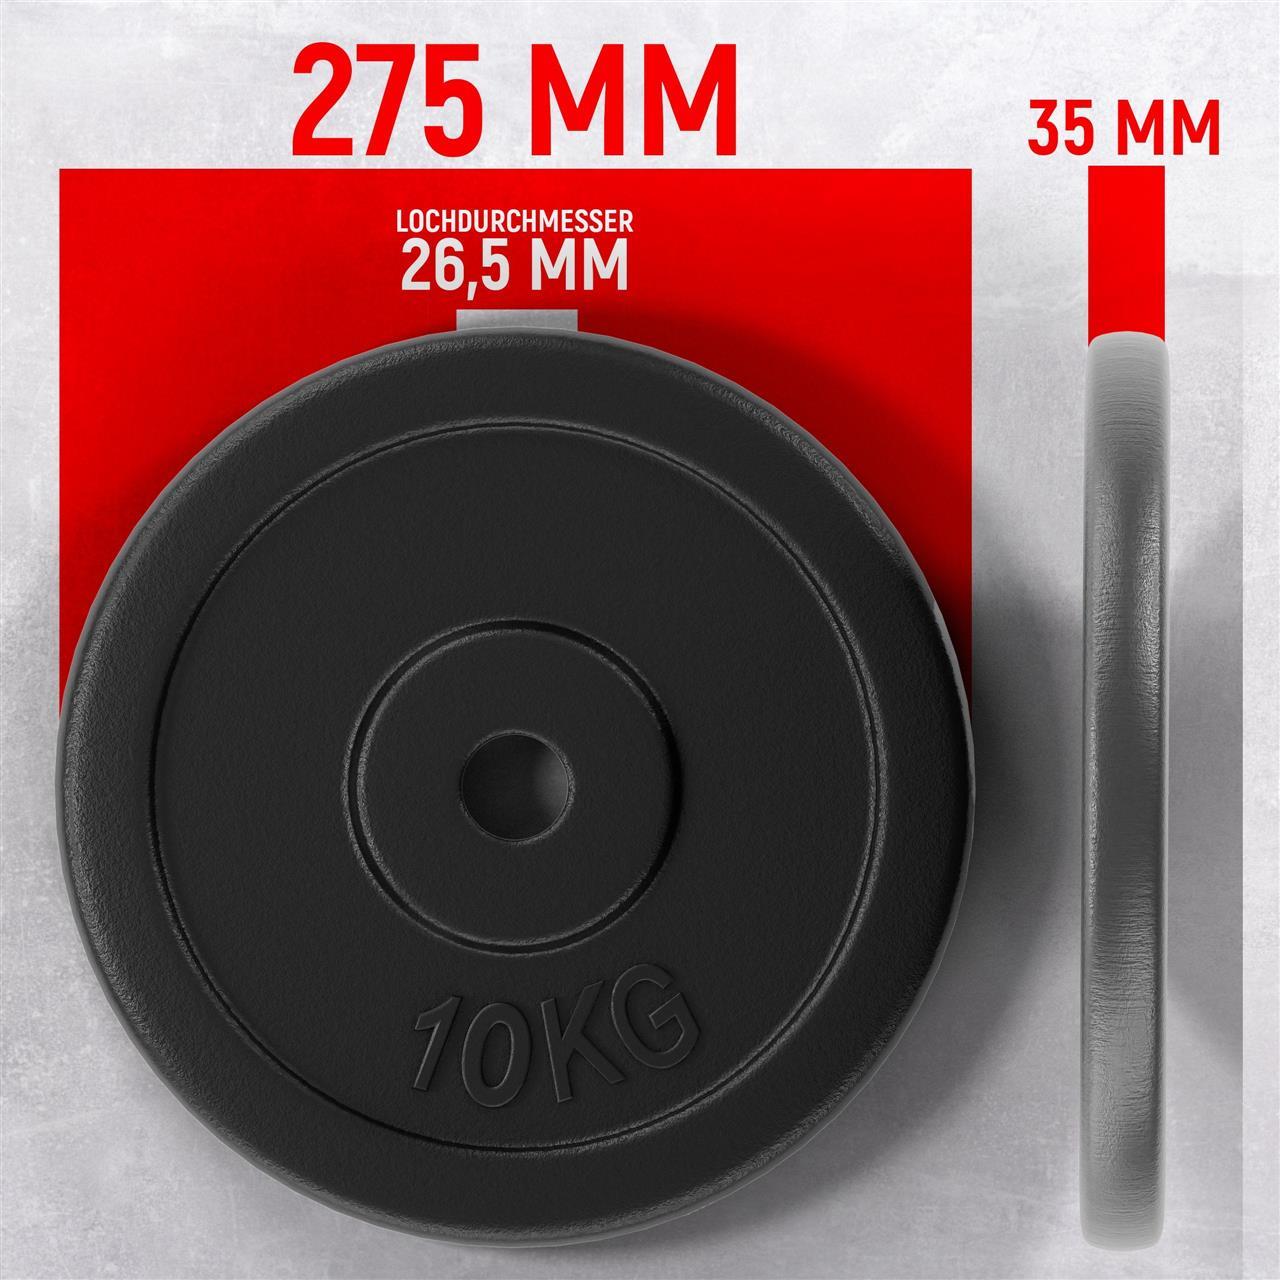 Additional weights (26.5mm) B-stock